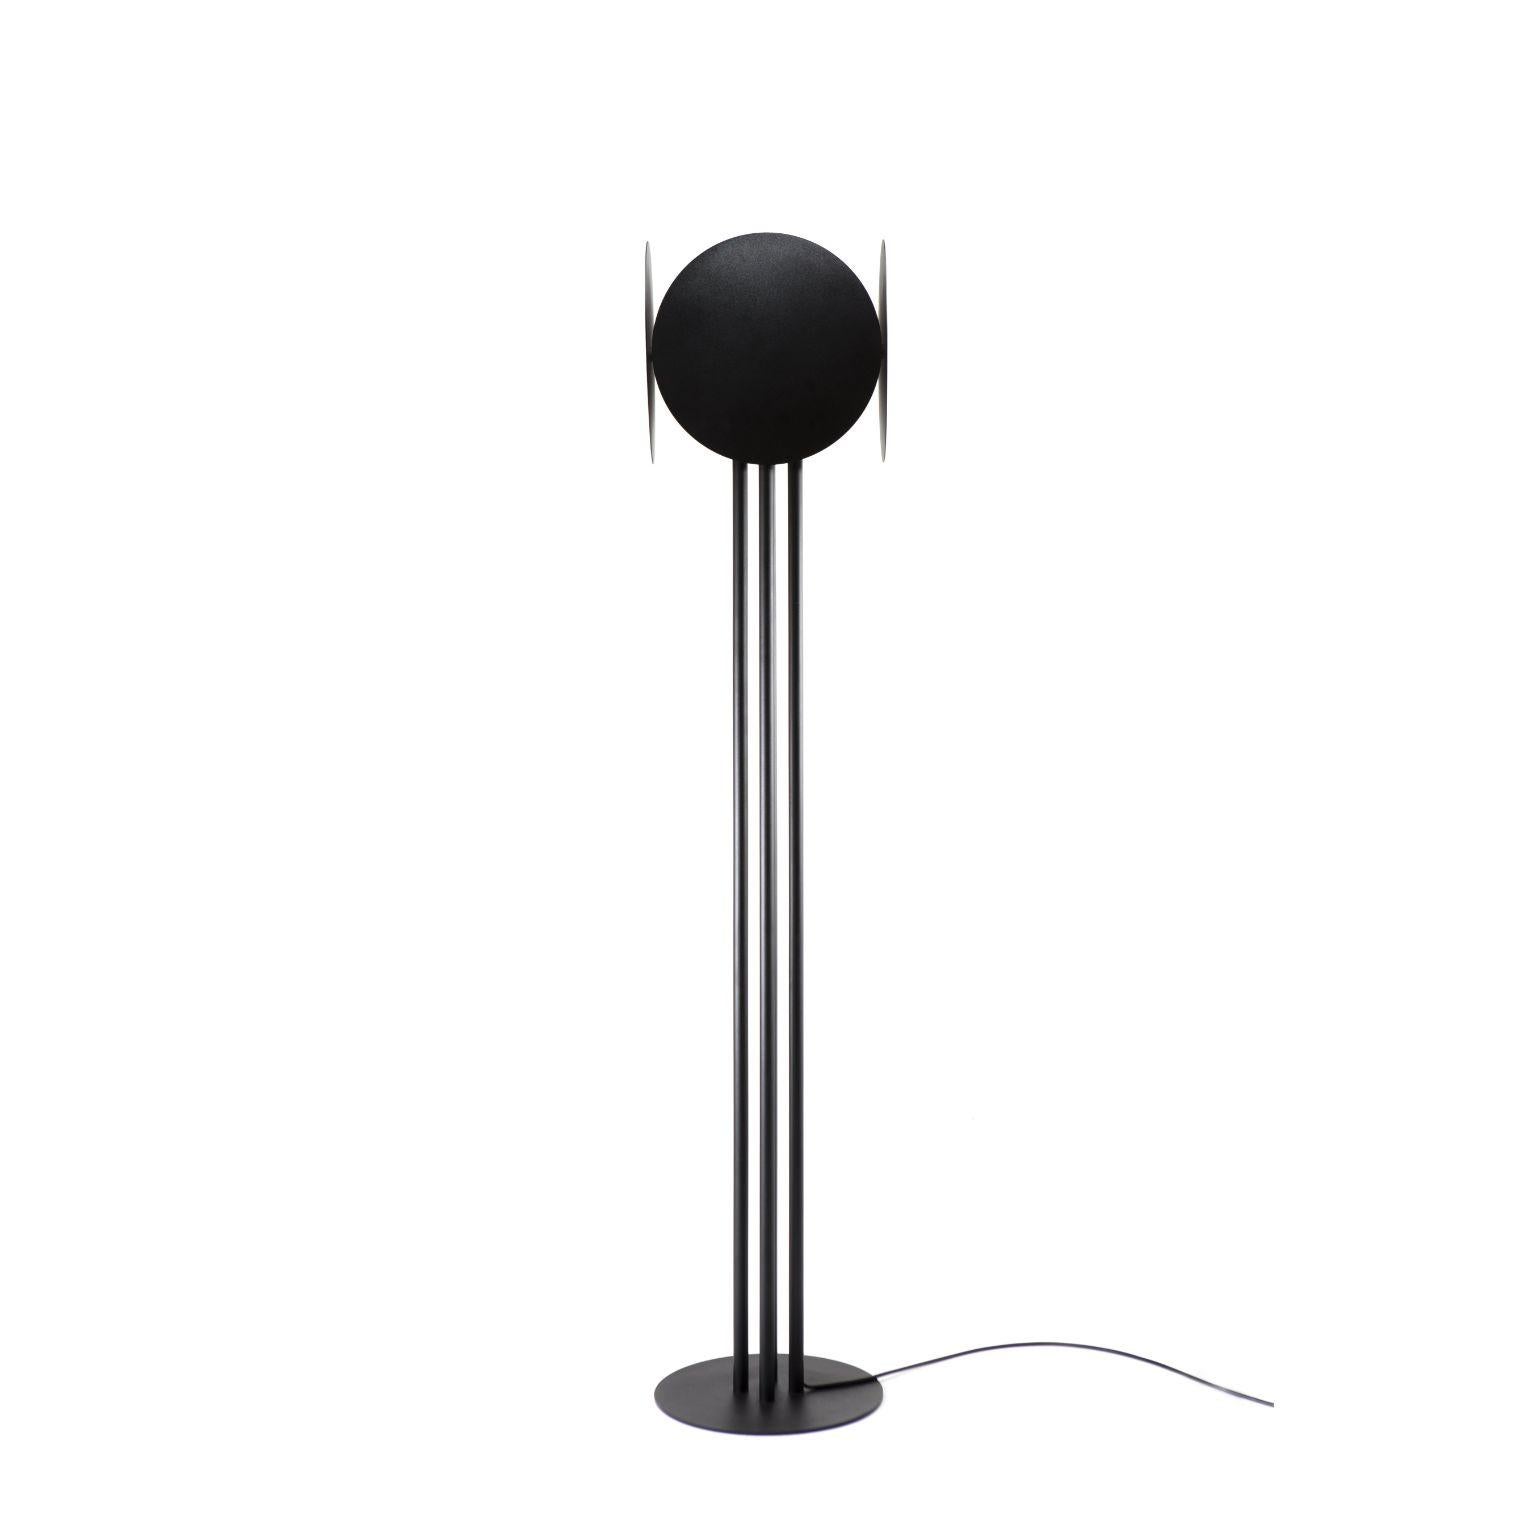 Dureza - Floor lamp by Cultivado Em Casa.
Dimensions: 34 x 34 x 170 cm.
Materials: Carbon steel and electrostatic painting.

All our lamps can be wired according to each country. If sold to the USA it will be wired for the USA for